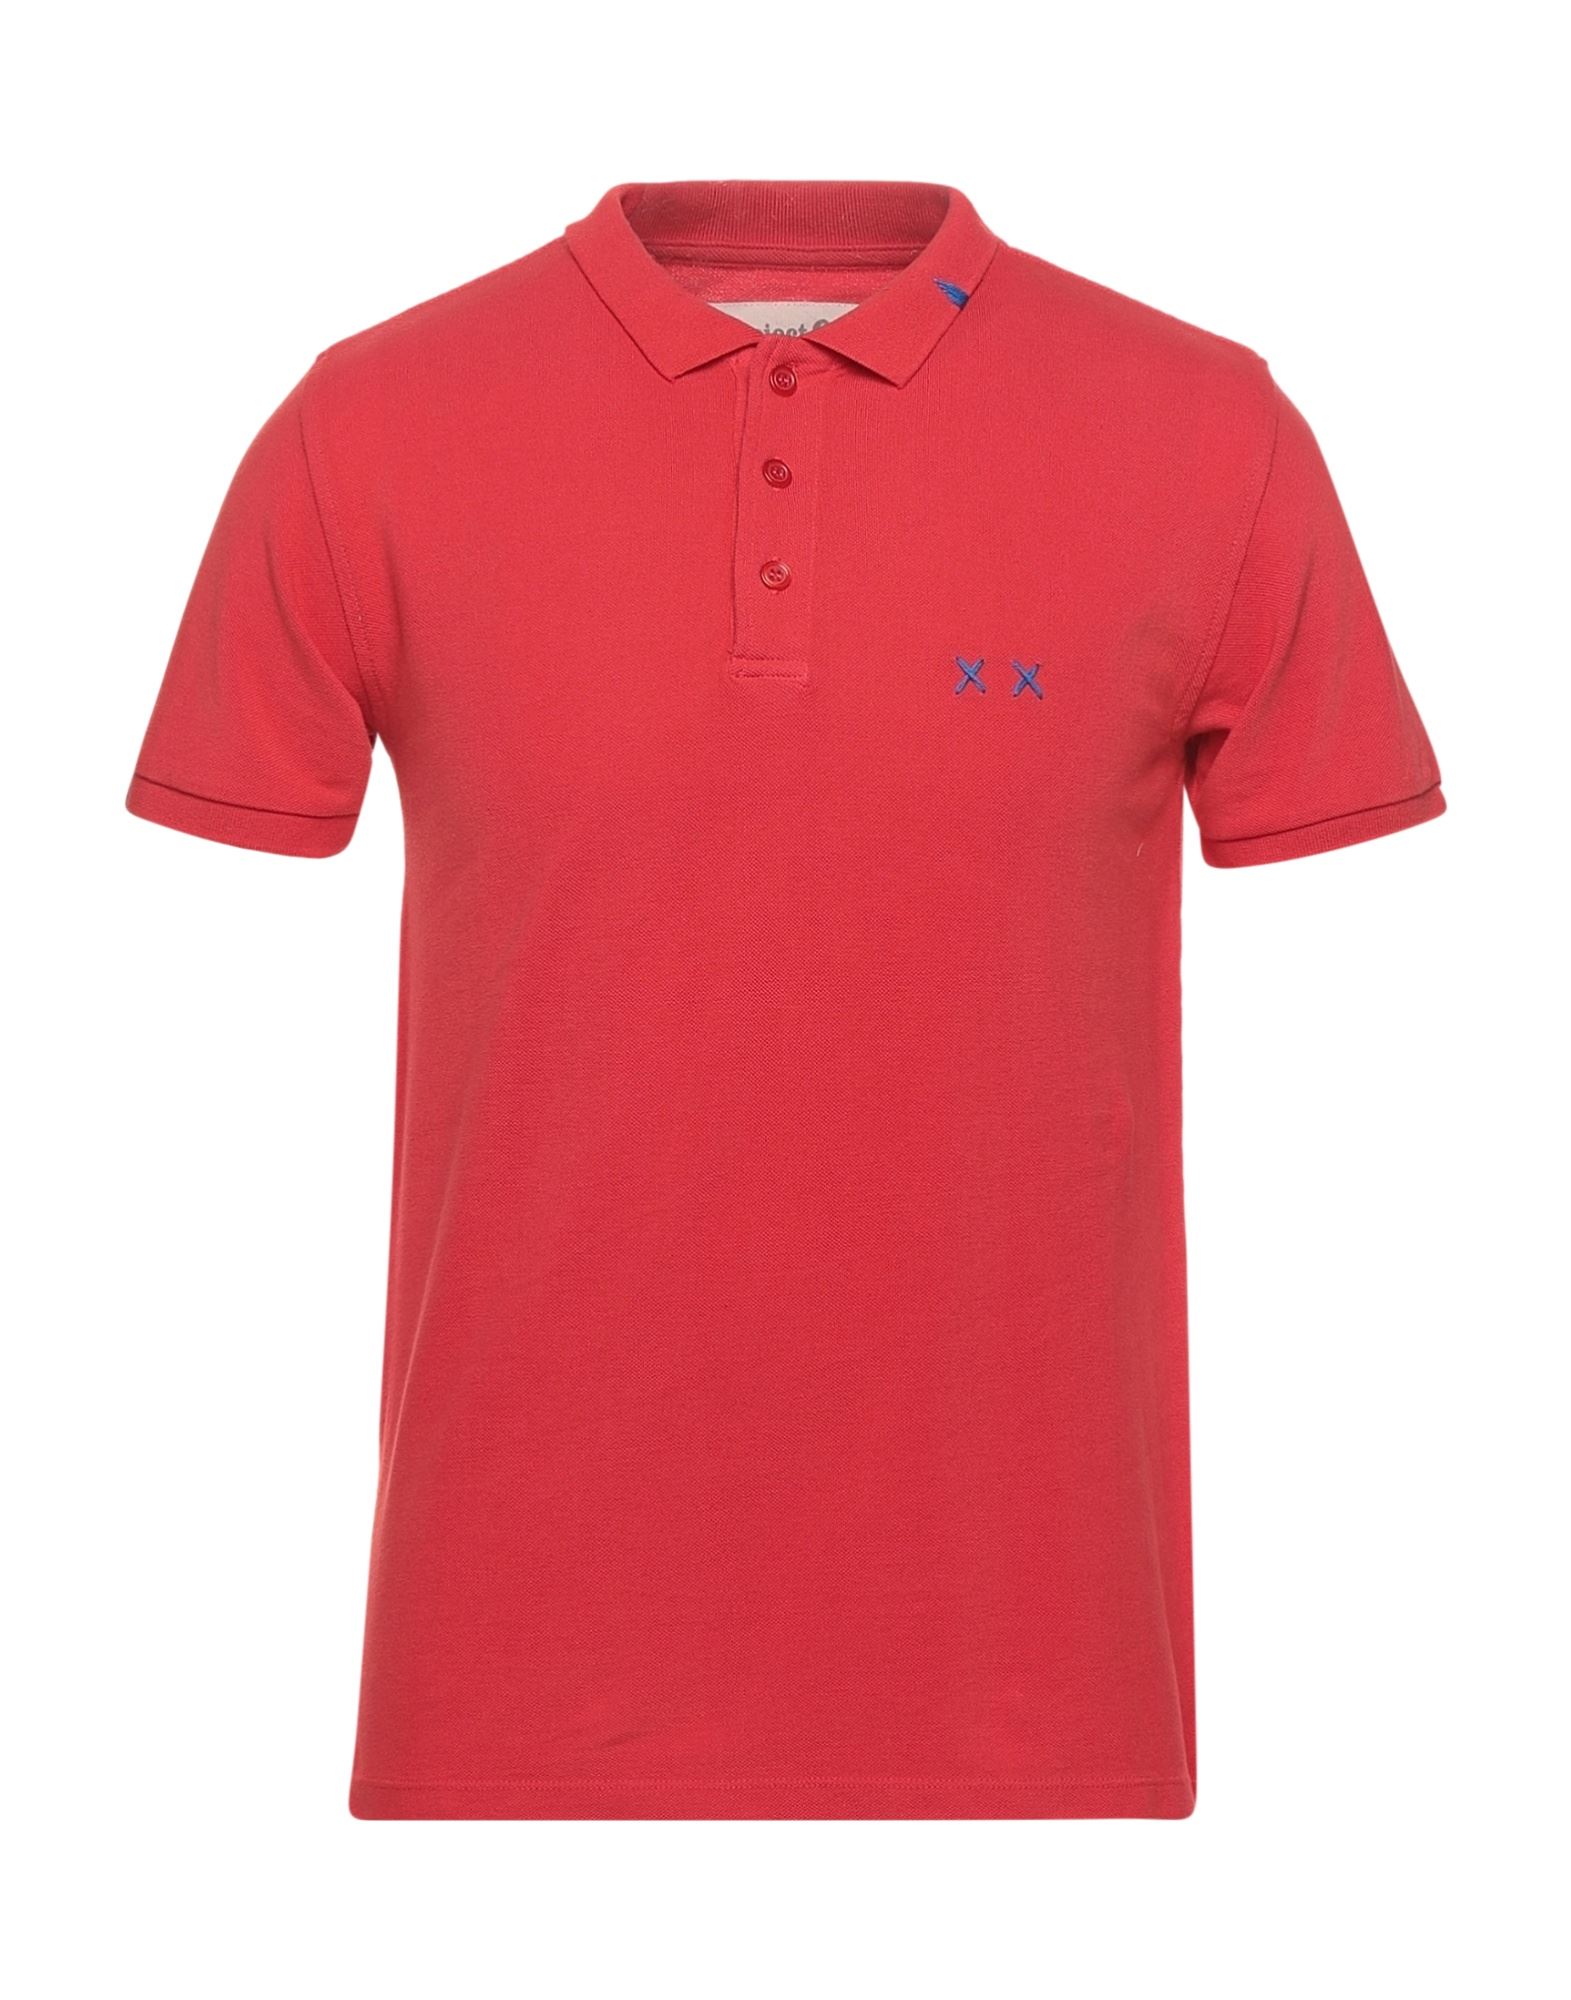 Project E Polo Shirts In Red